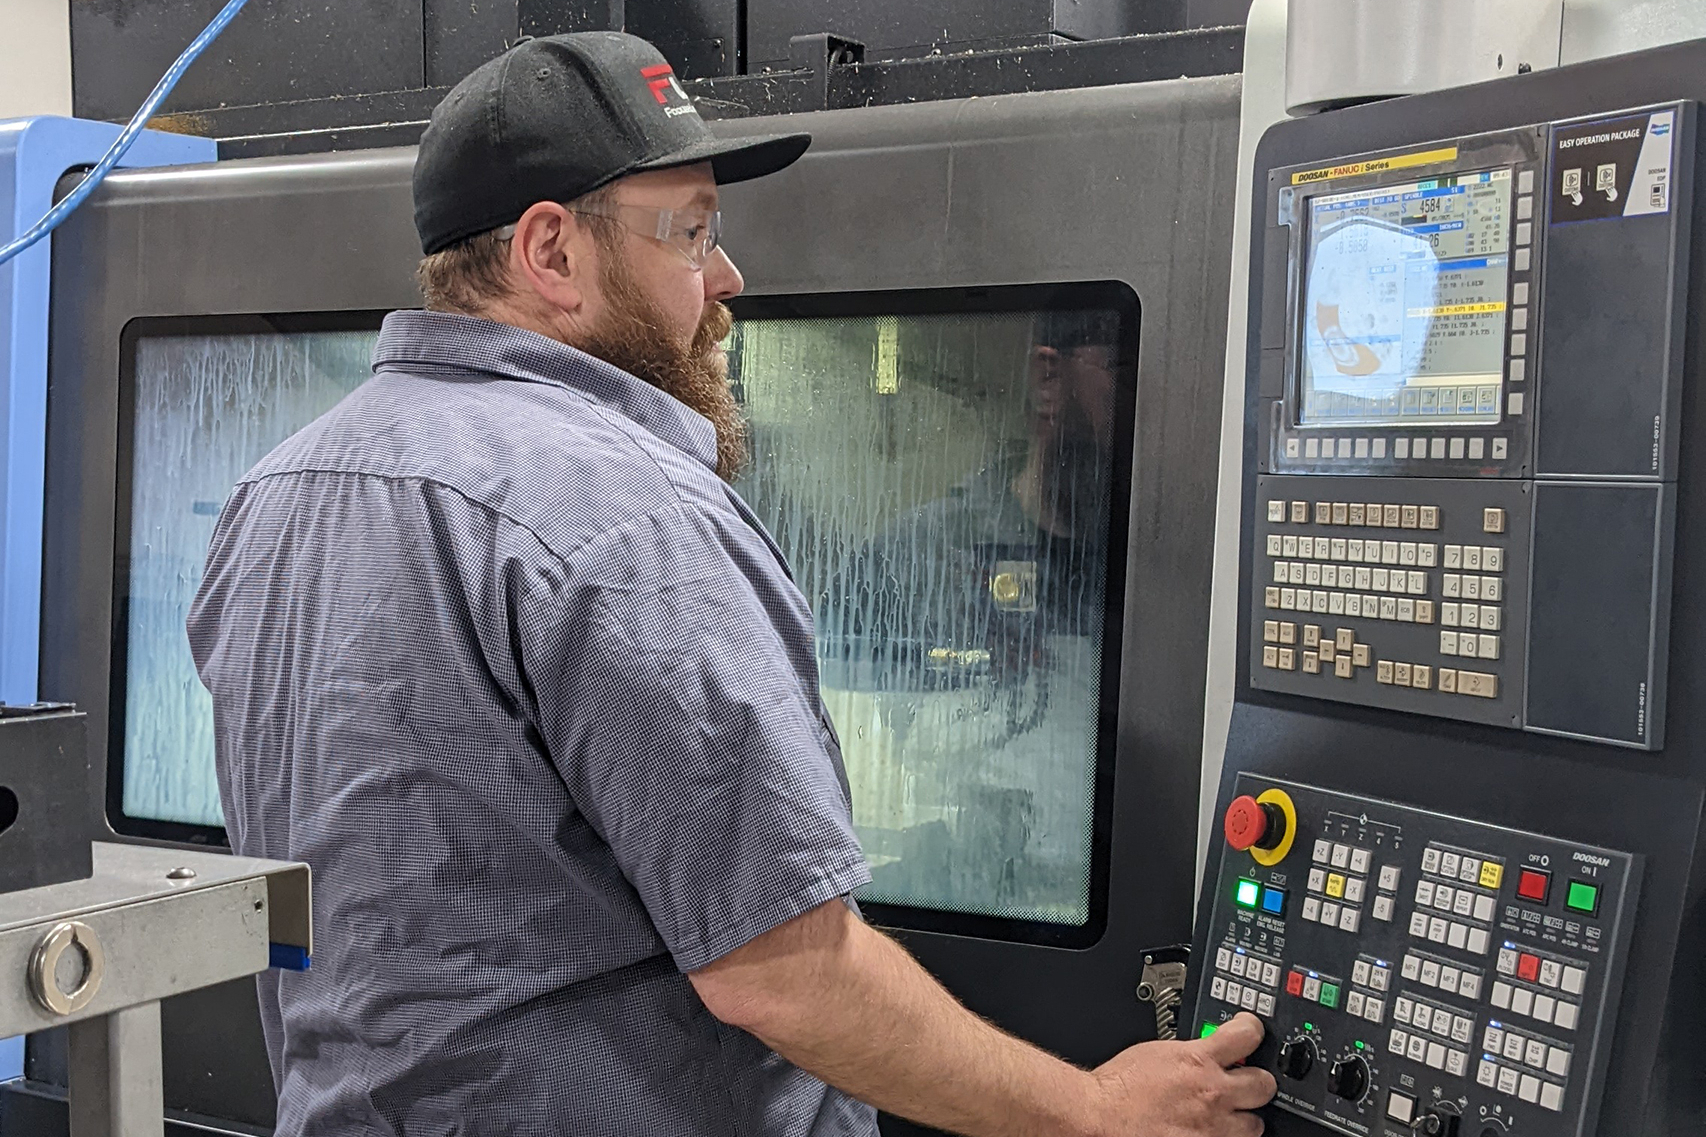 machine tool operator works at the controller for a VMC